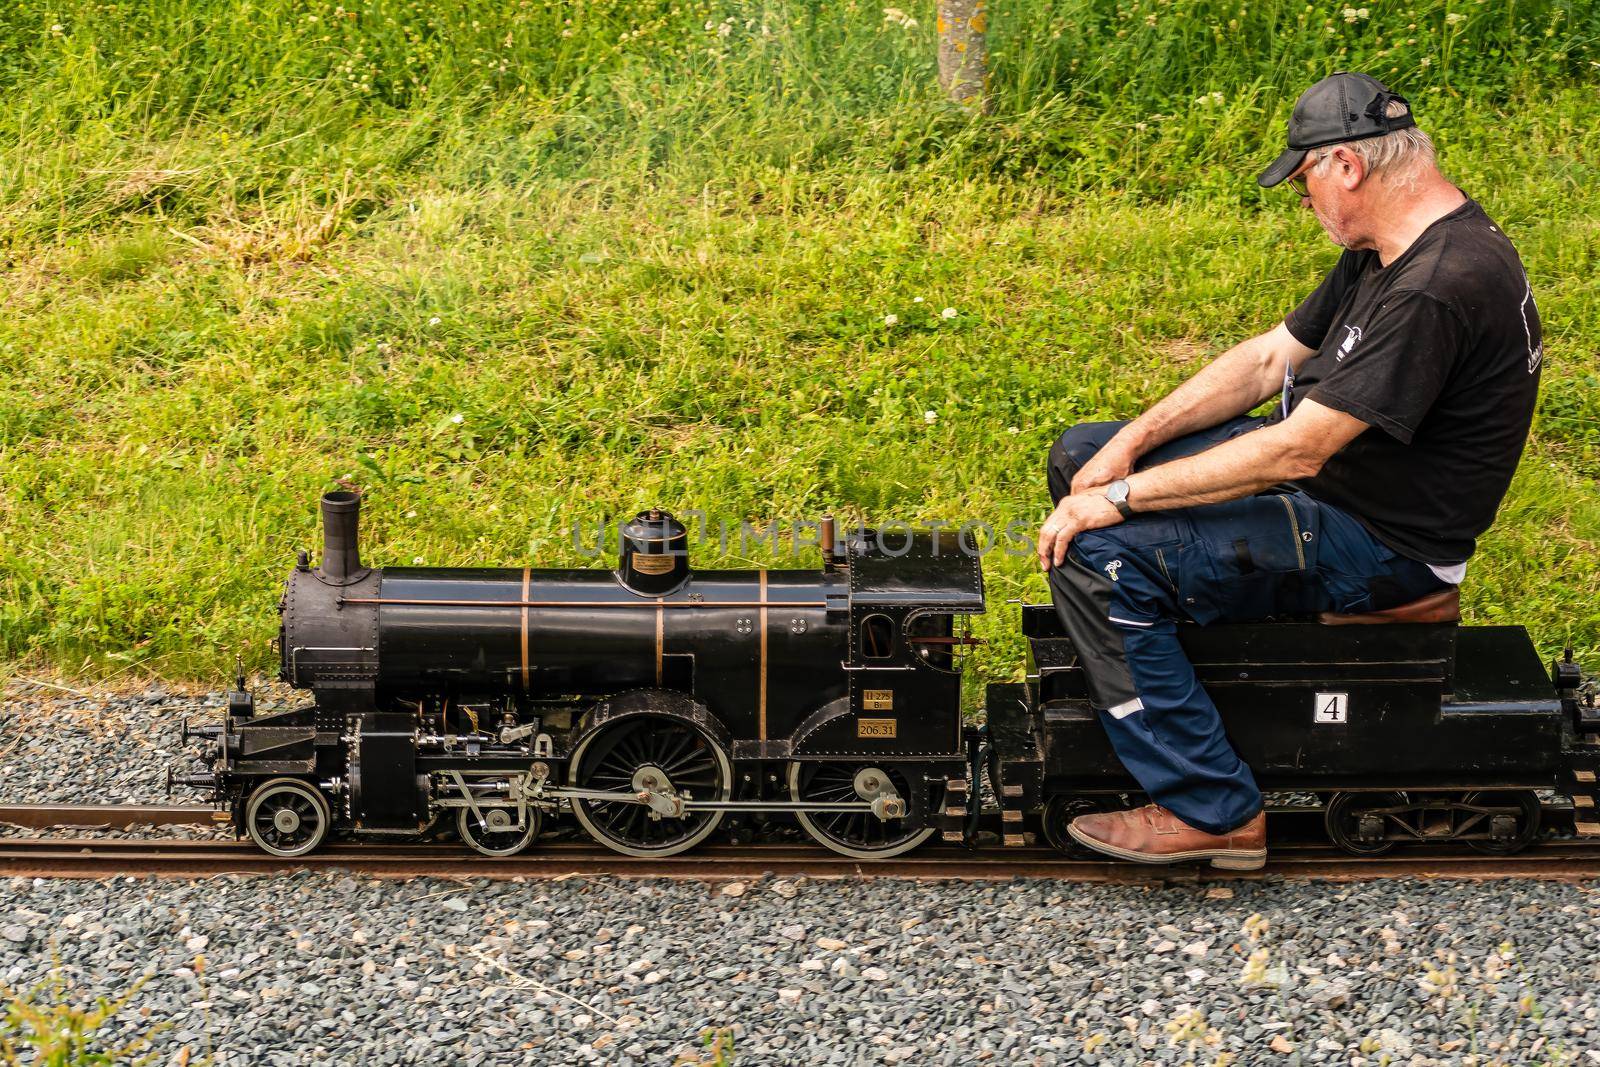 A seated man drives a large model of steam locomotive by rostik924